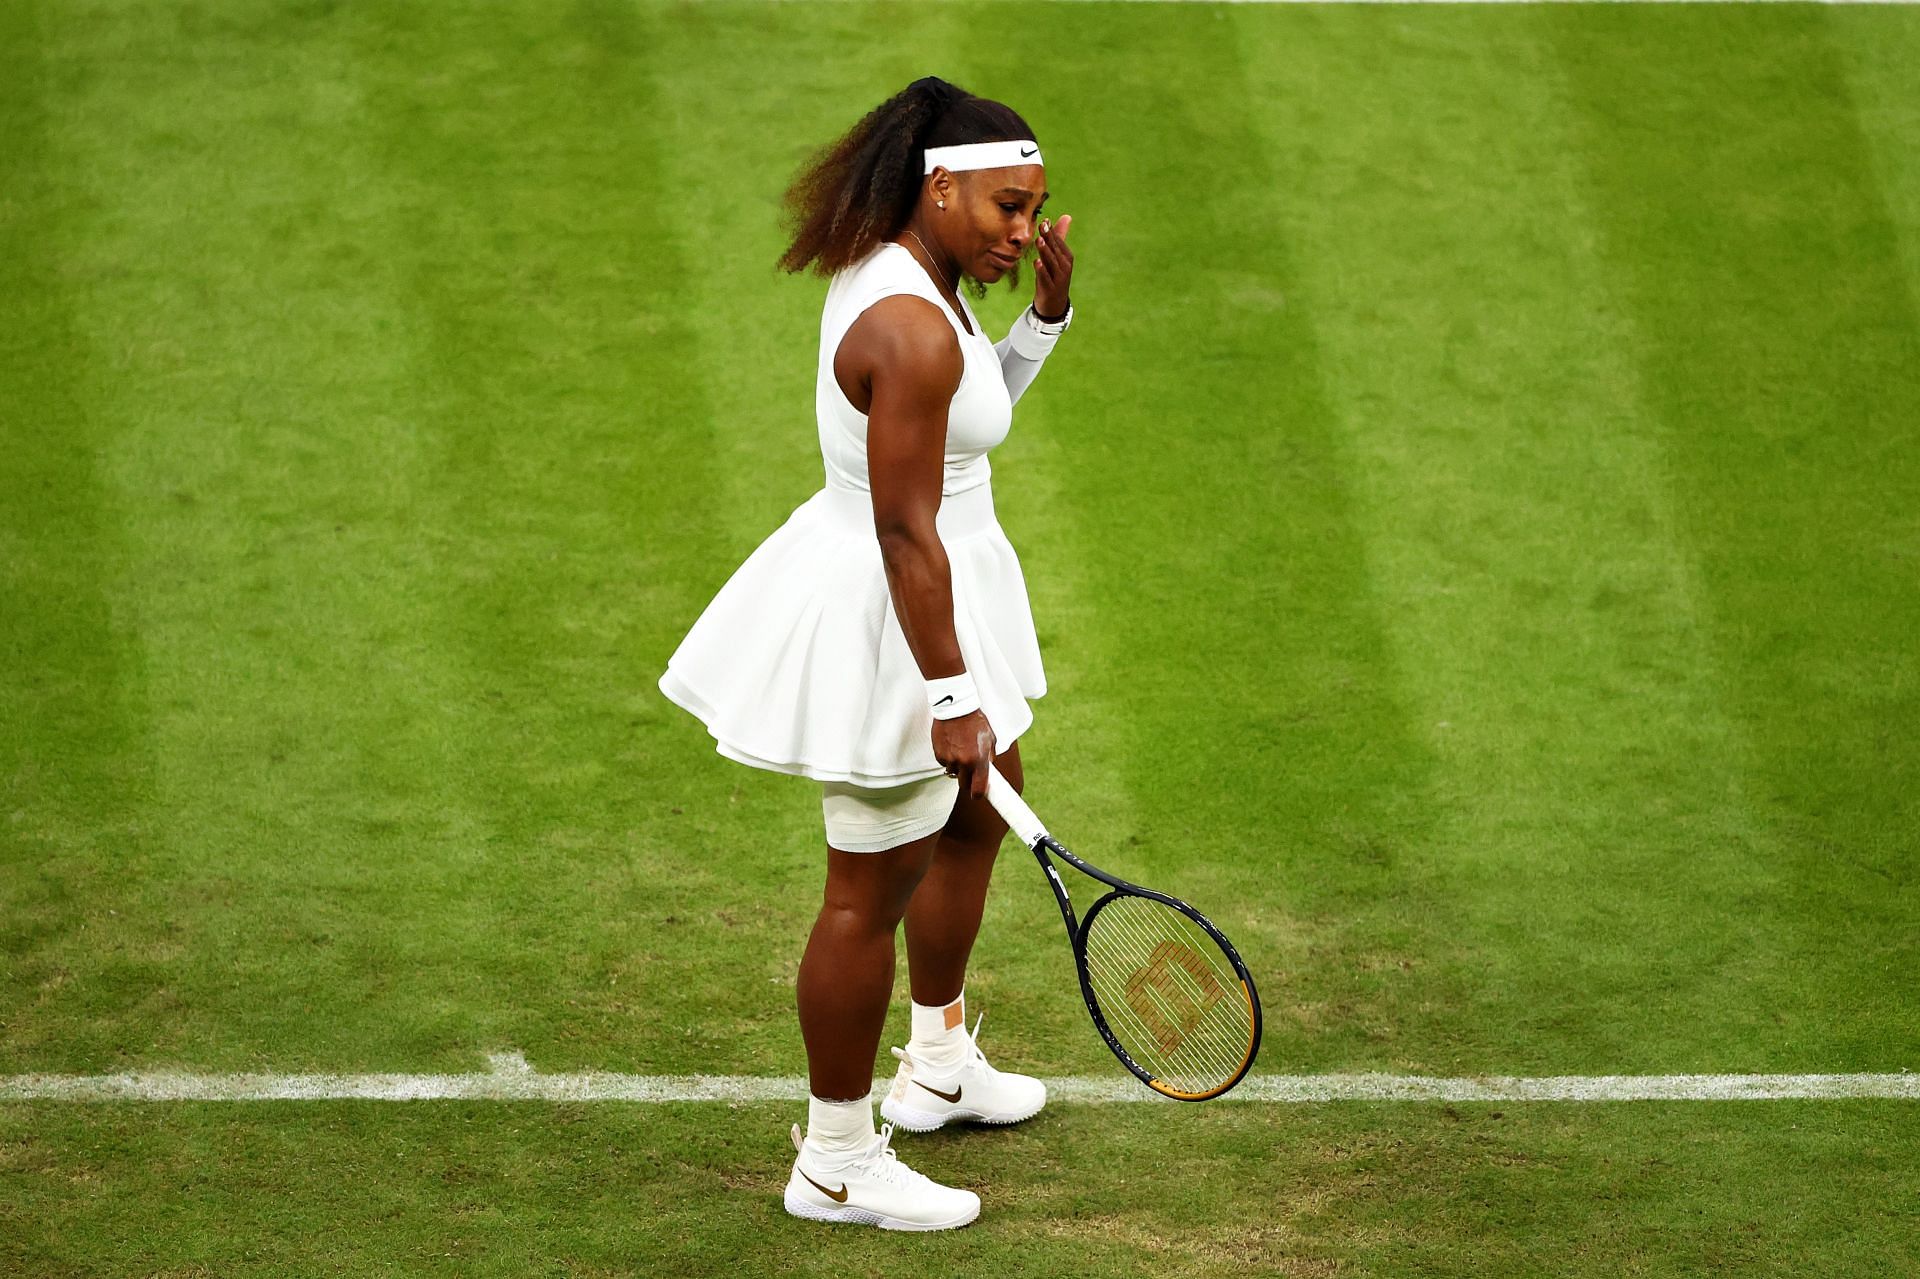 Serena Williams on Day Two: The Championships - Wimbledon 2021